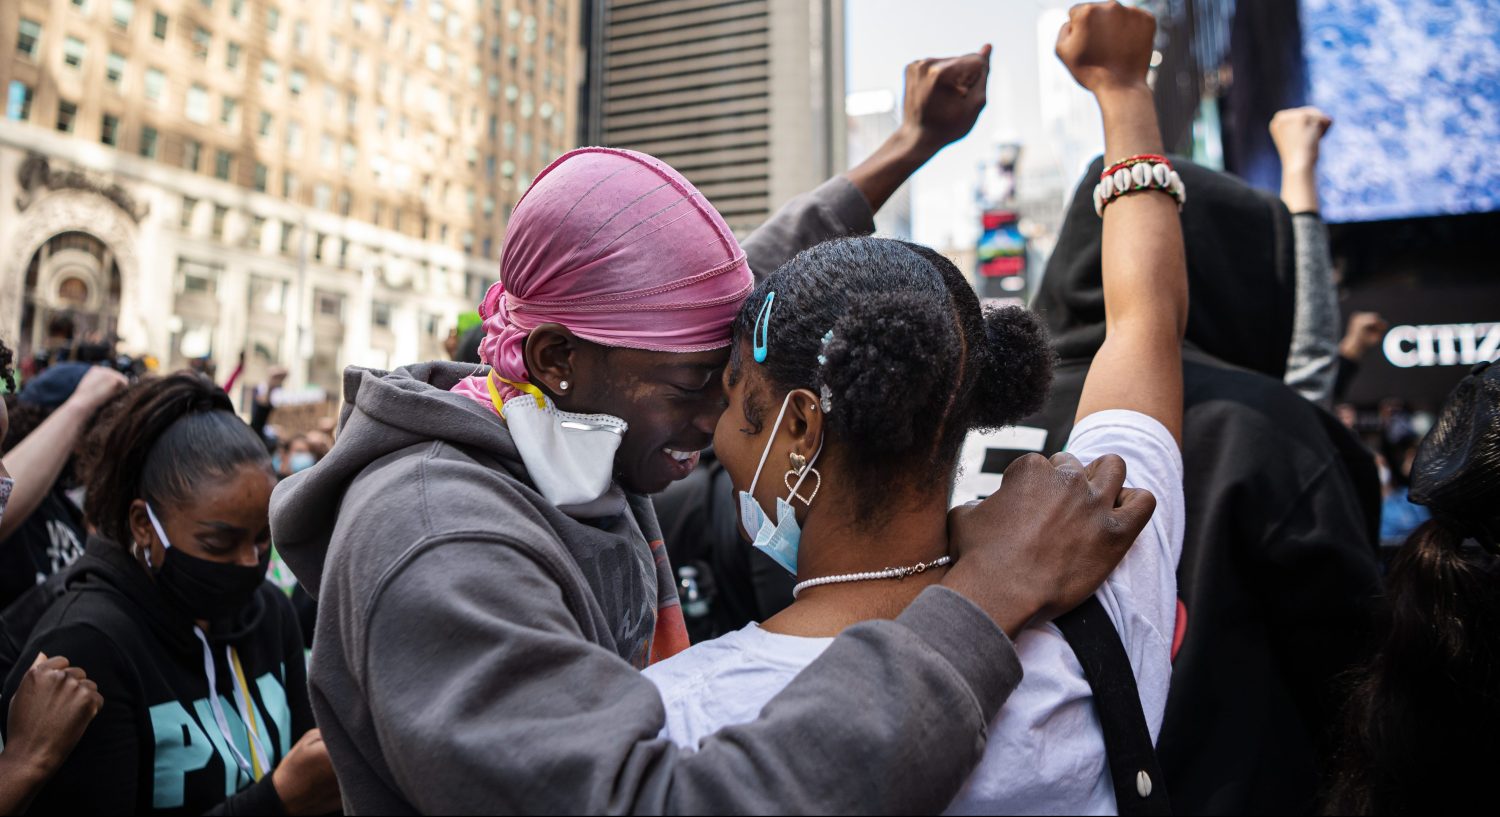 200601 Keion Staton and Aissatou Traore embrace each other and raise their arms during a protest over the death of George Floyd, on June 1, 2020 at Times Square in the Manhattan borough of New York, NY, USA. Photo: Joel Marklund / BILDBYRÅN / kod JM / 88157 bbeng protest demonstration Black Lives Matter No Use Sweden. No Use Norway. No Use Austria.